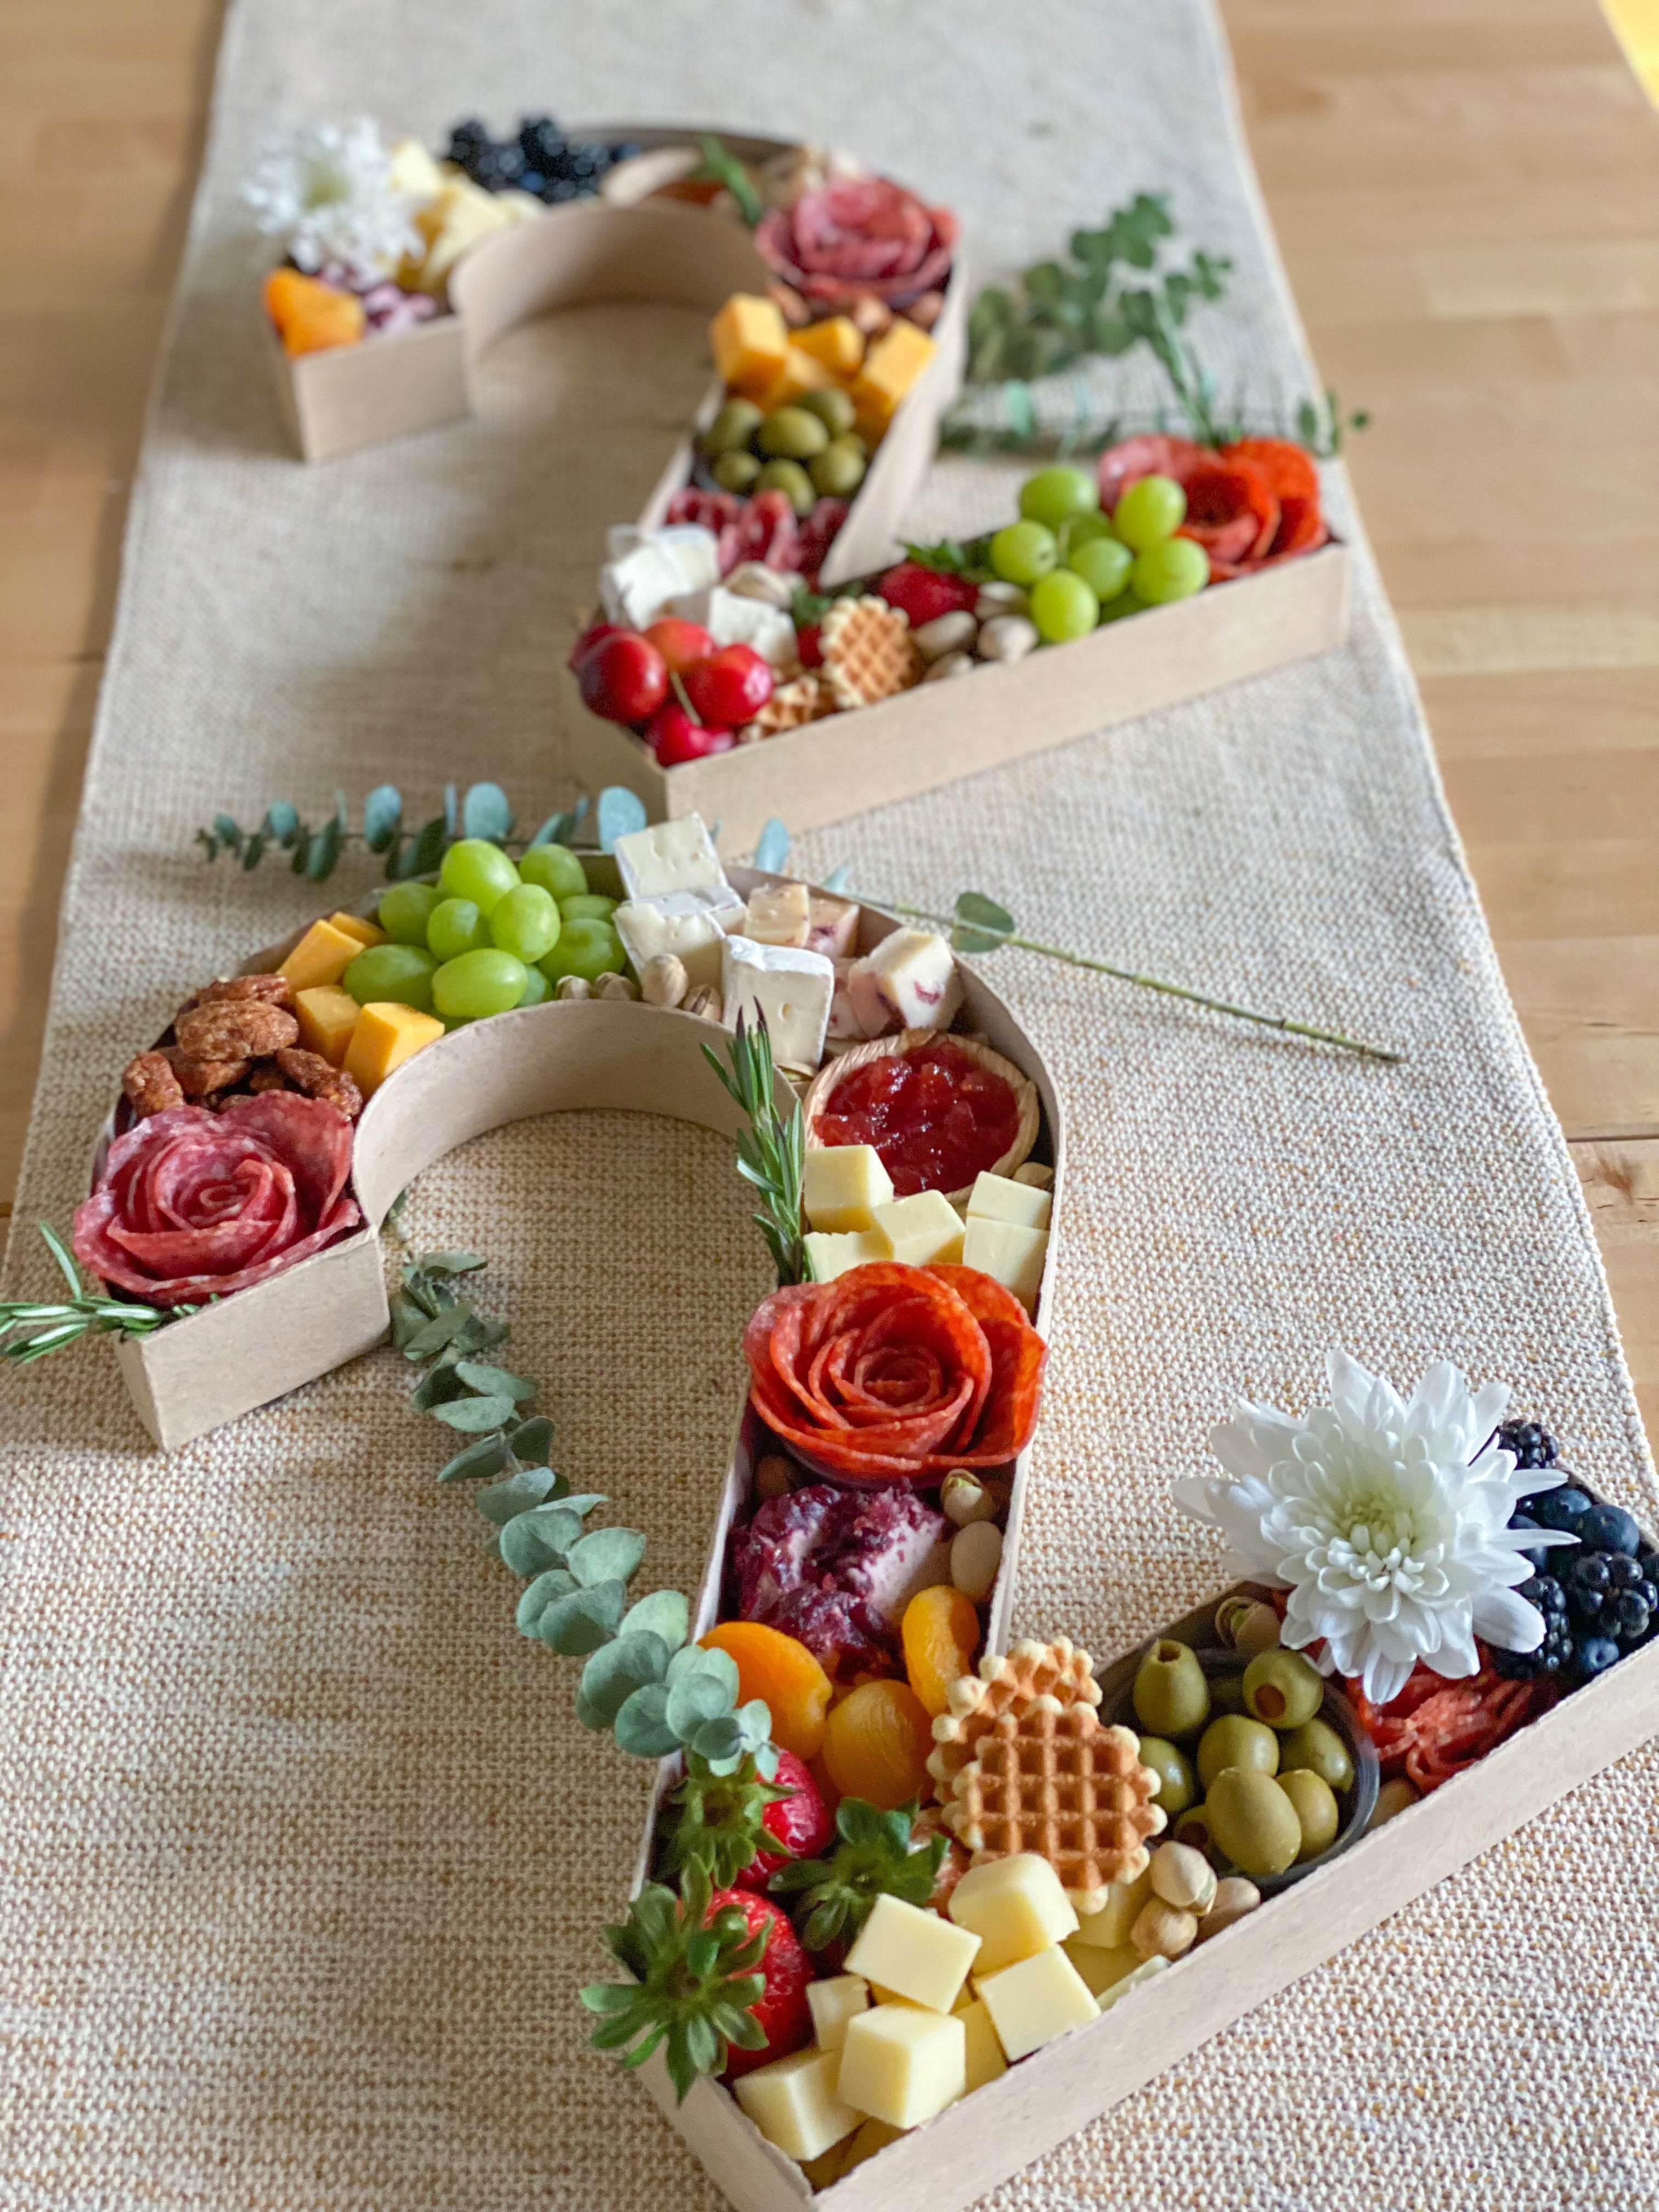 Letter and Number Charcuterie Trays -  New Zealand